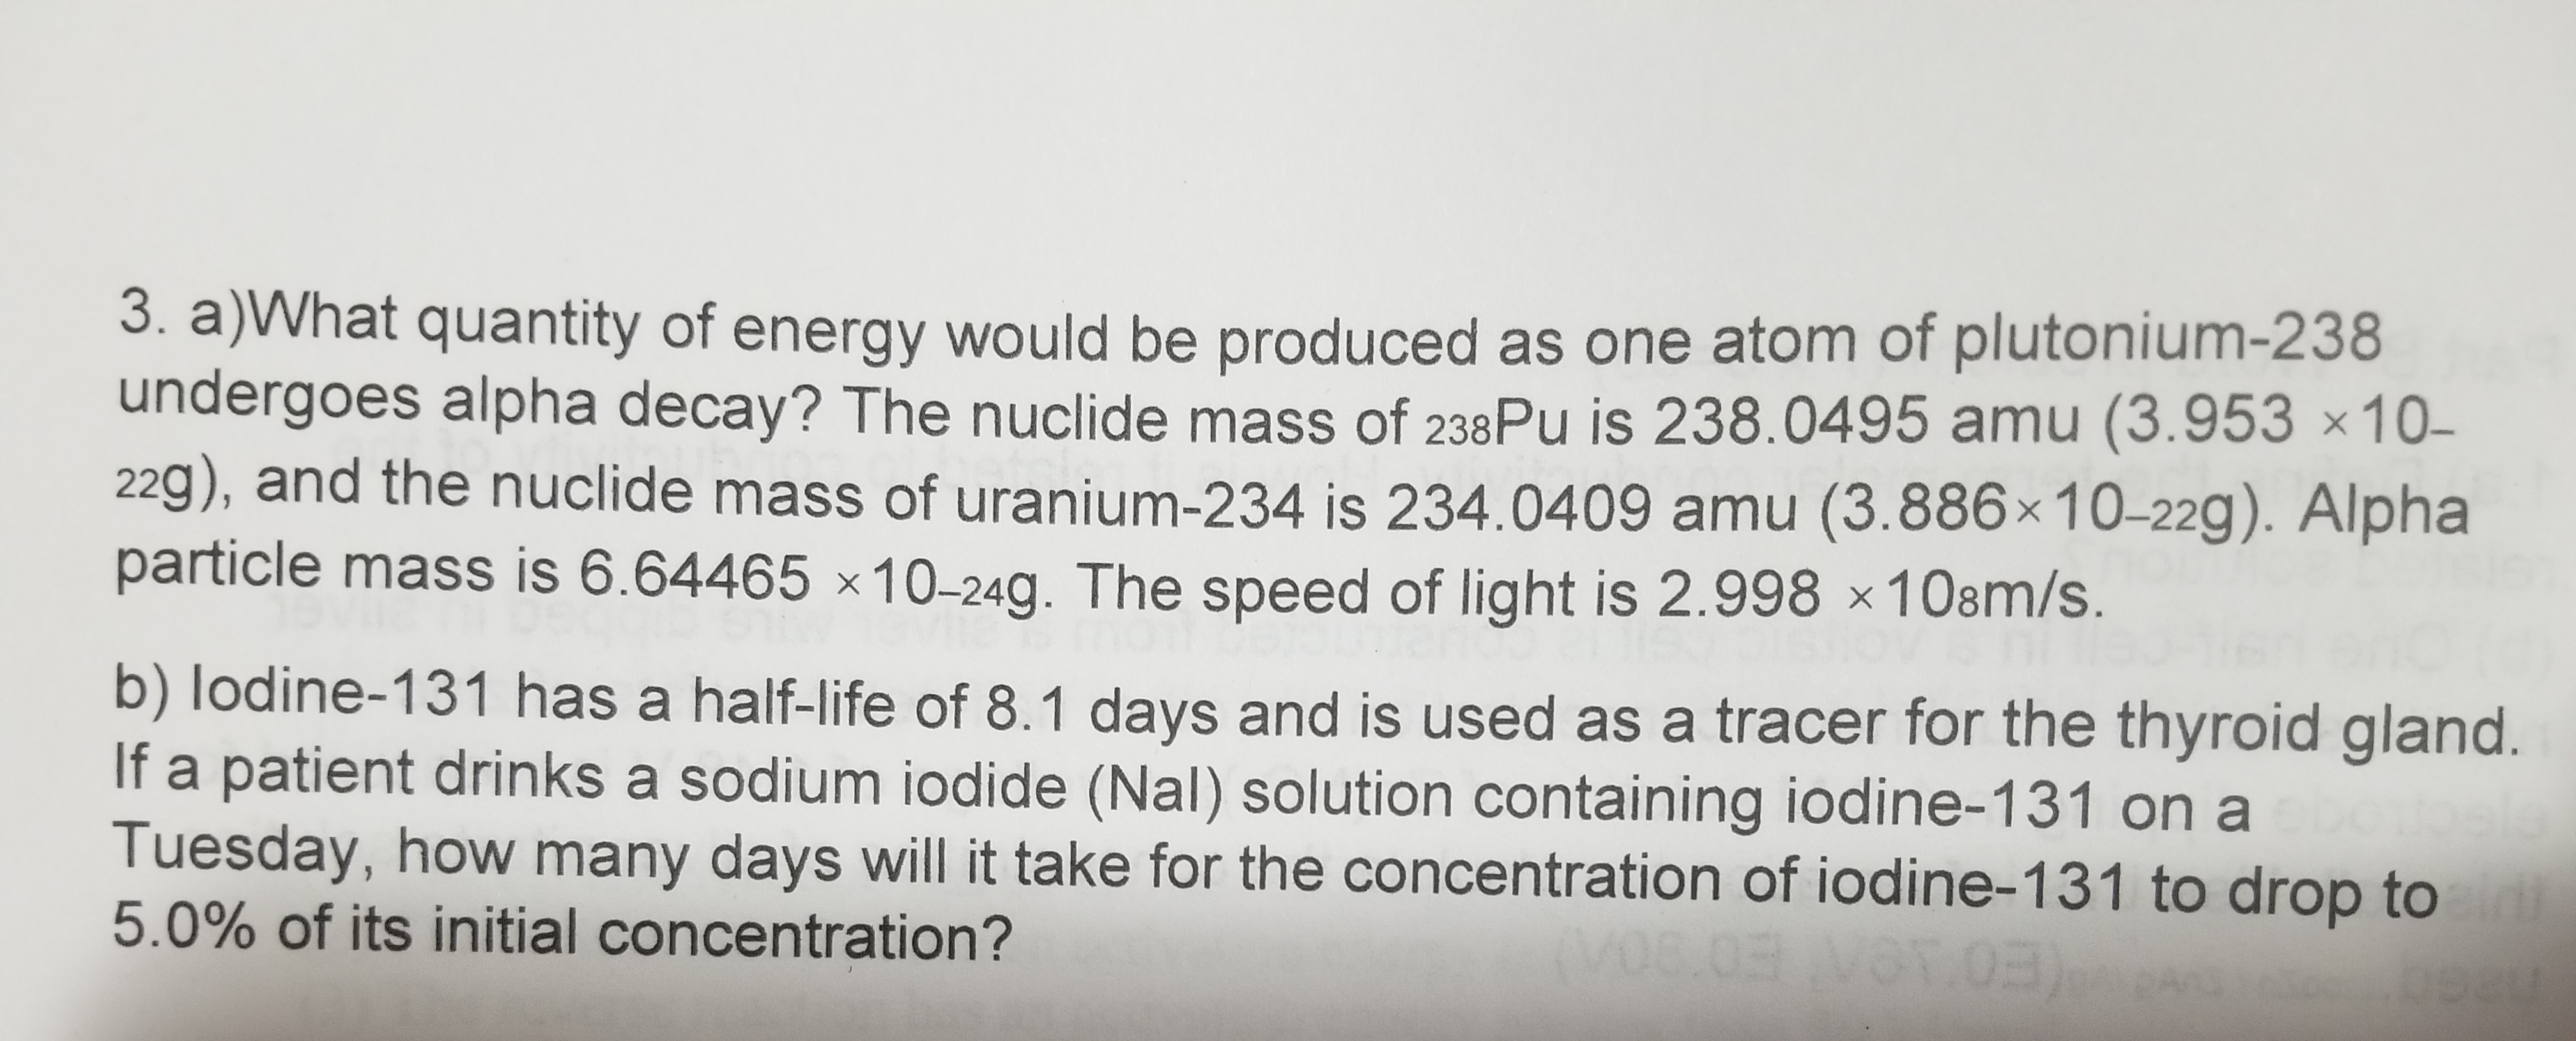 3. a)What quantity of energy would be produced as one atom of plutonium-238
undergoes alpha decay? The nuclide mass of 238PU is 238.0495 amu (3.953 ×10–
22g), and the nuclide mass of uranium-234 is 234.0409 amu (3.886×10-22g). Alpha
particle mass is 6.64465 ×10-24g. The speed of light is 2.998 ×108m/s.
